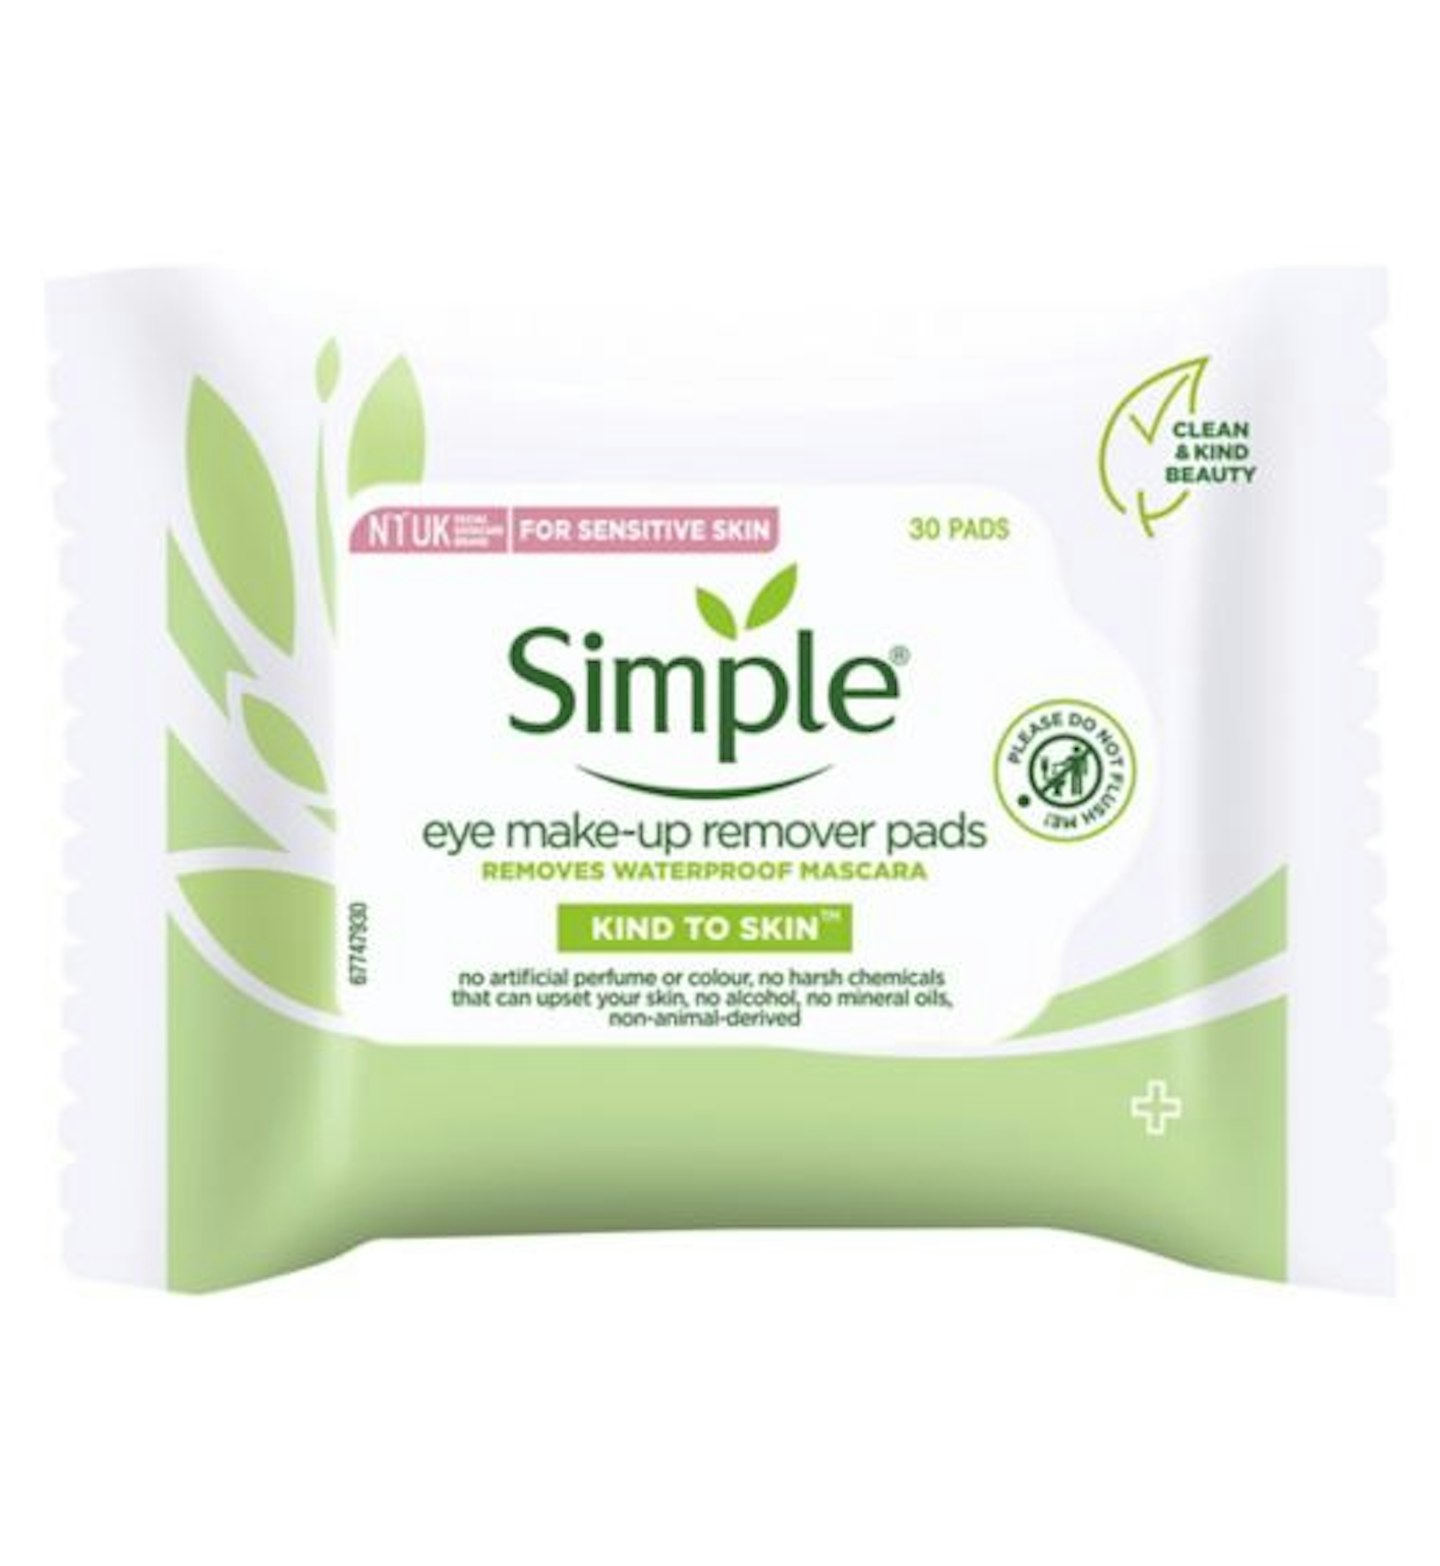 Simple Kind to Skin Eye Make-Up Remover Pads